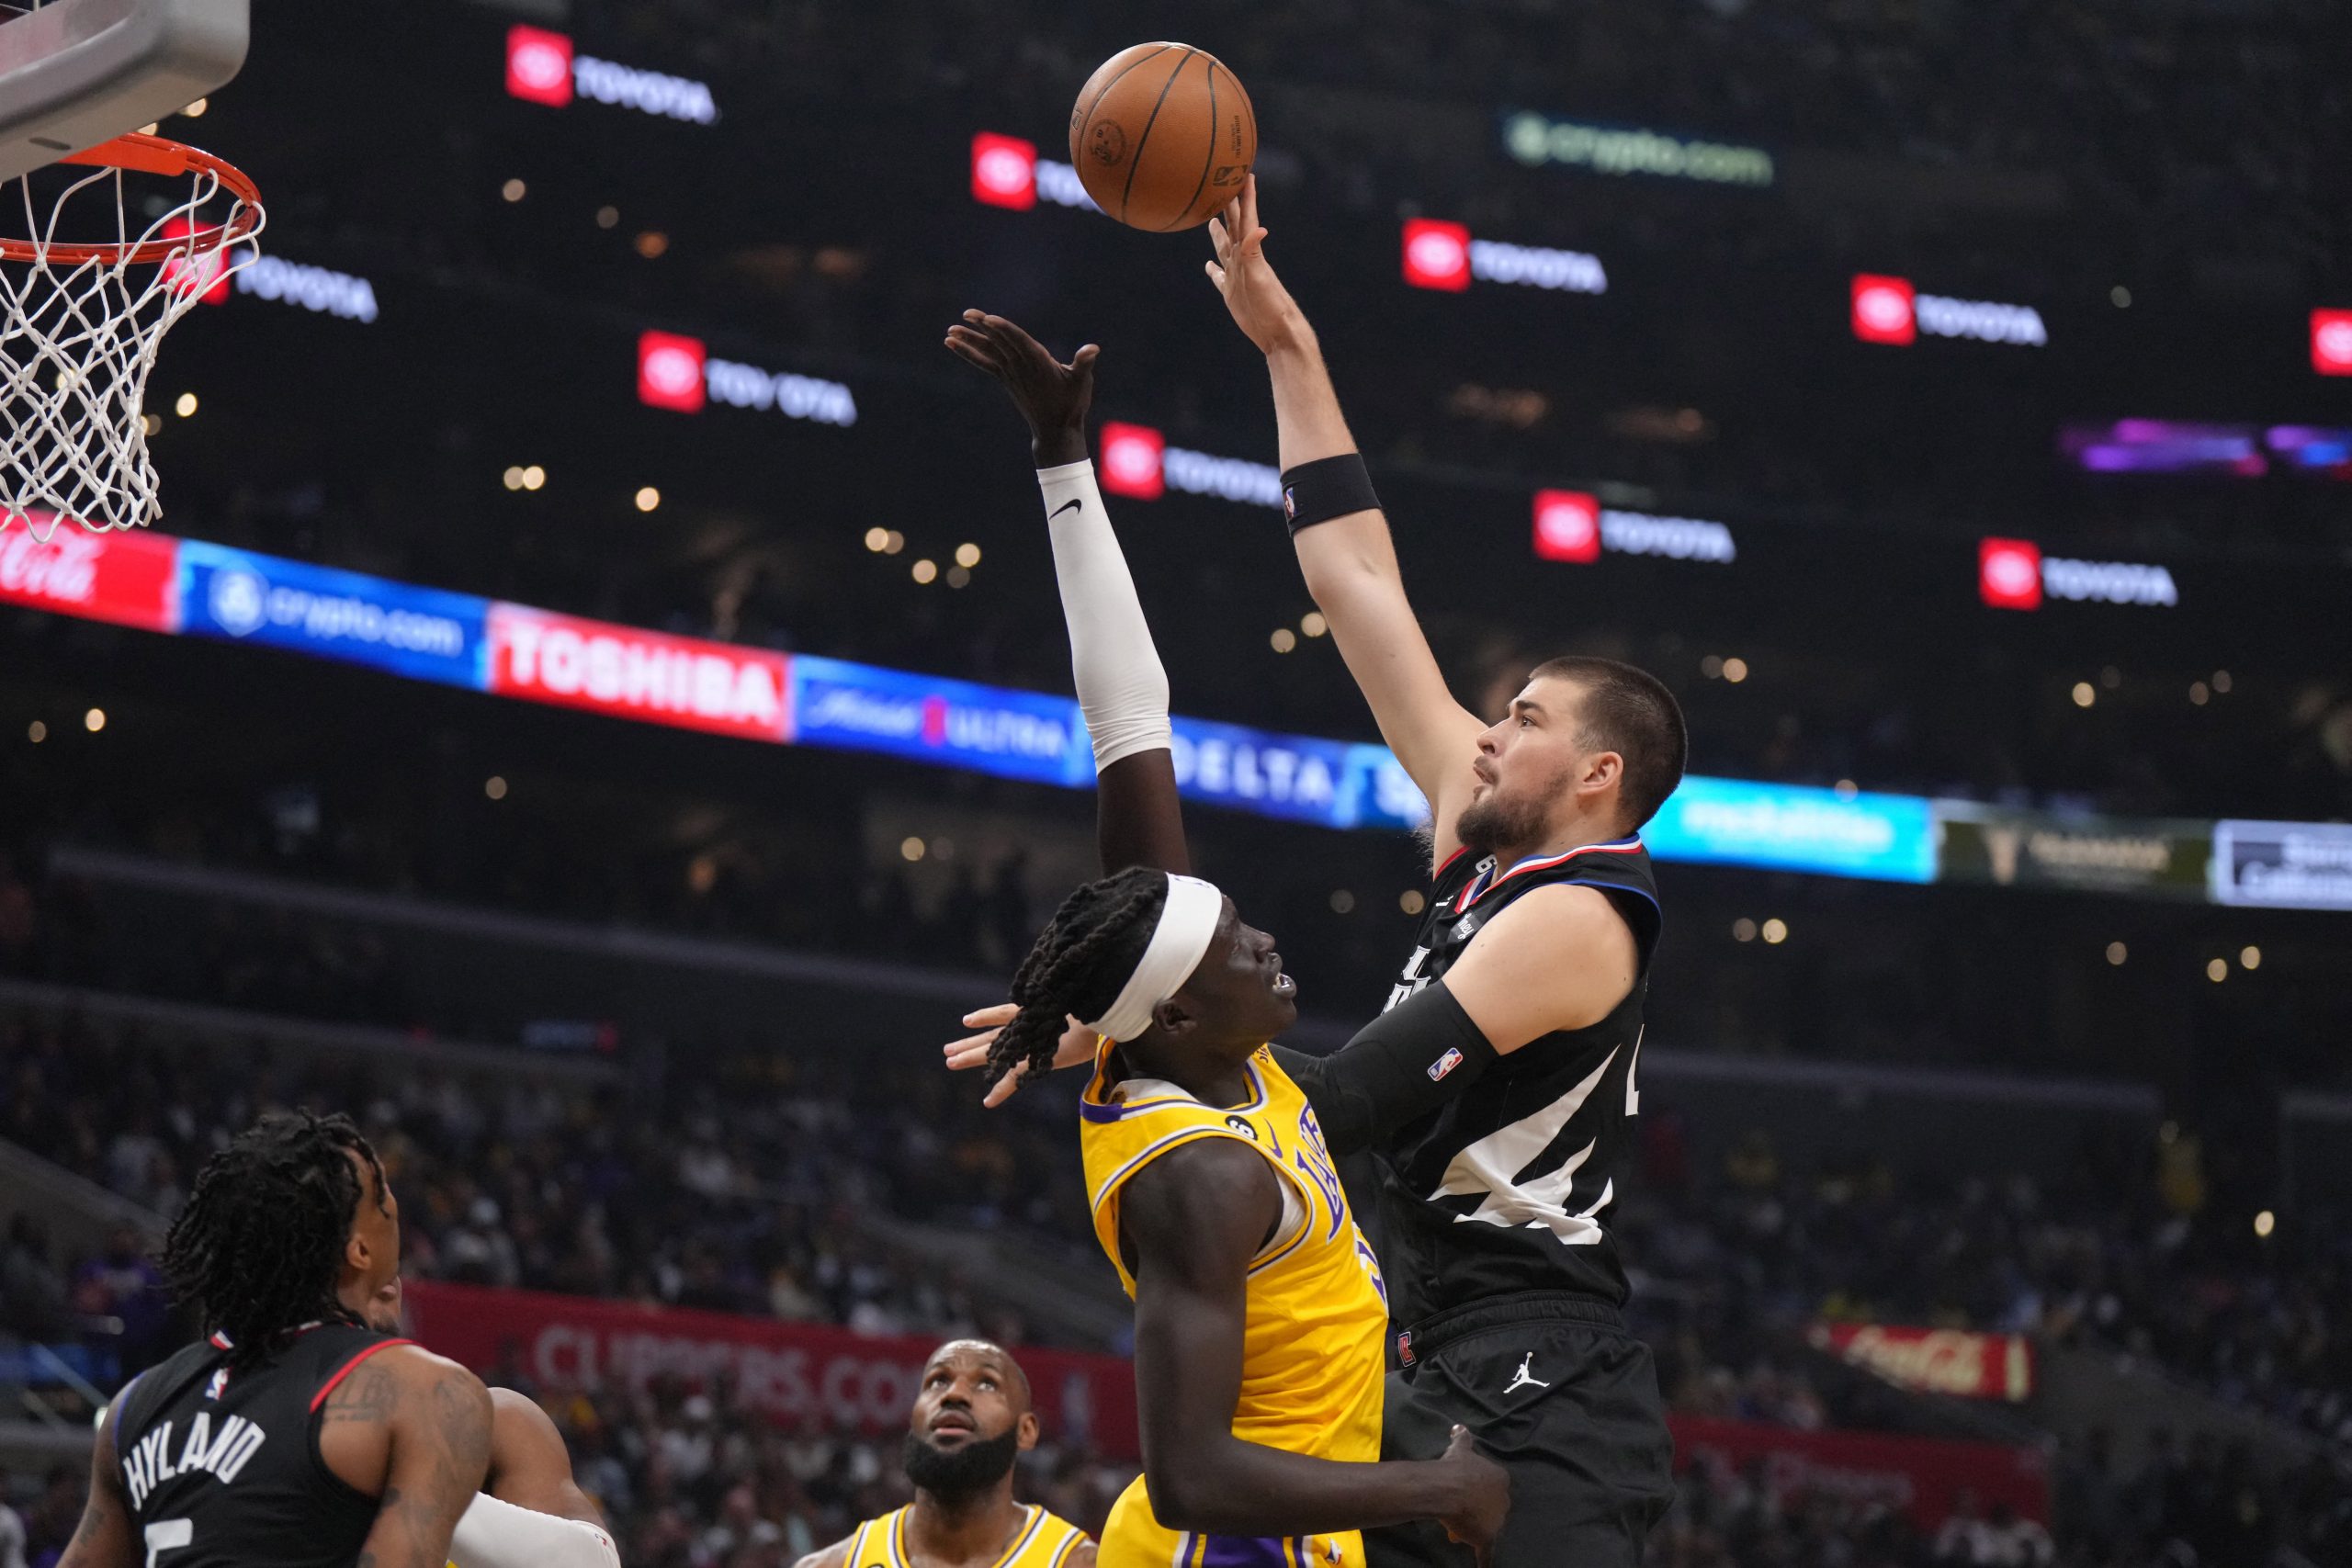 Apr 5, 2023; Los Angeles, California, USA; LA Clippers center Ivica Zubac (40) shoots the ball against Los Angeles Lakers forward Wenyen Gabriel (35) in the first half at Crypto.com Arena. Mandatory Credit: Kirby Lee-USA TODAY Sports Photo: Kirby Lee/REUTERS